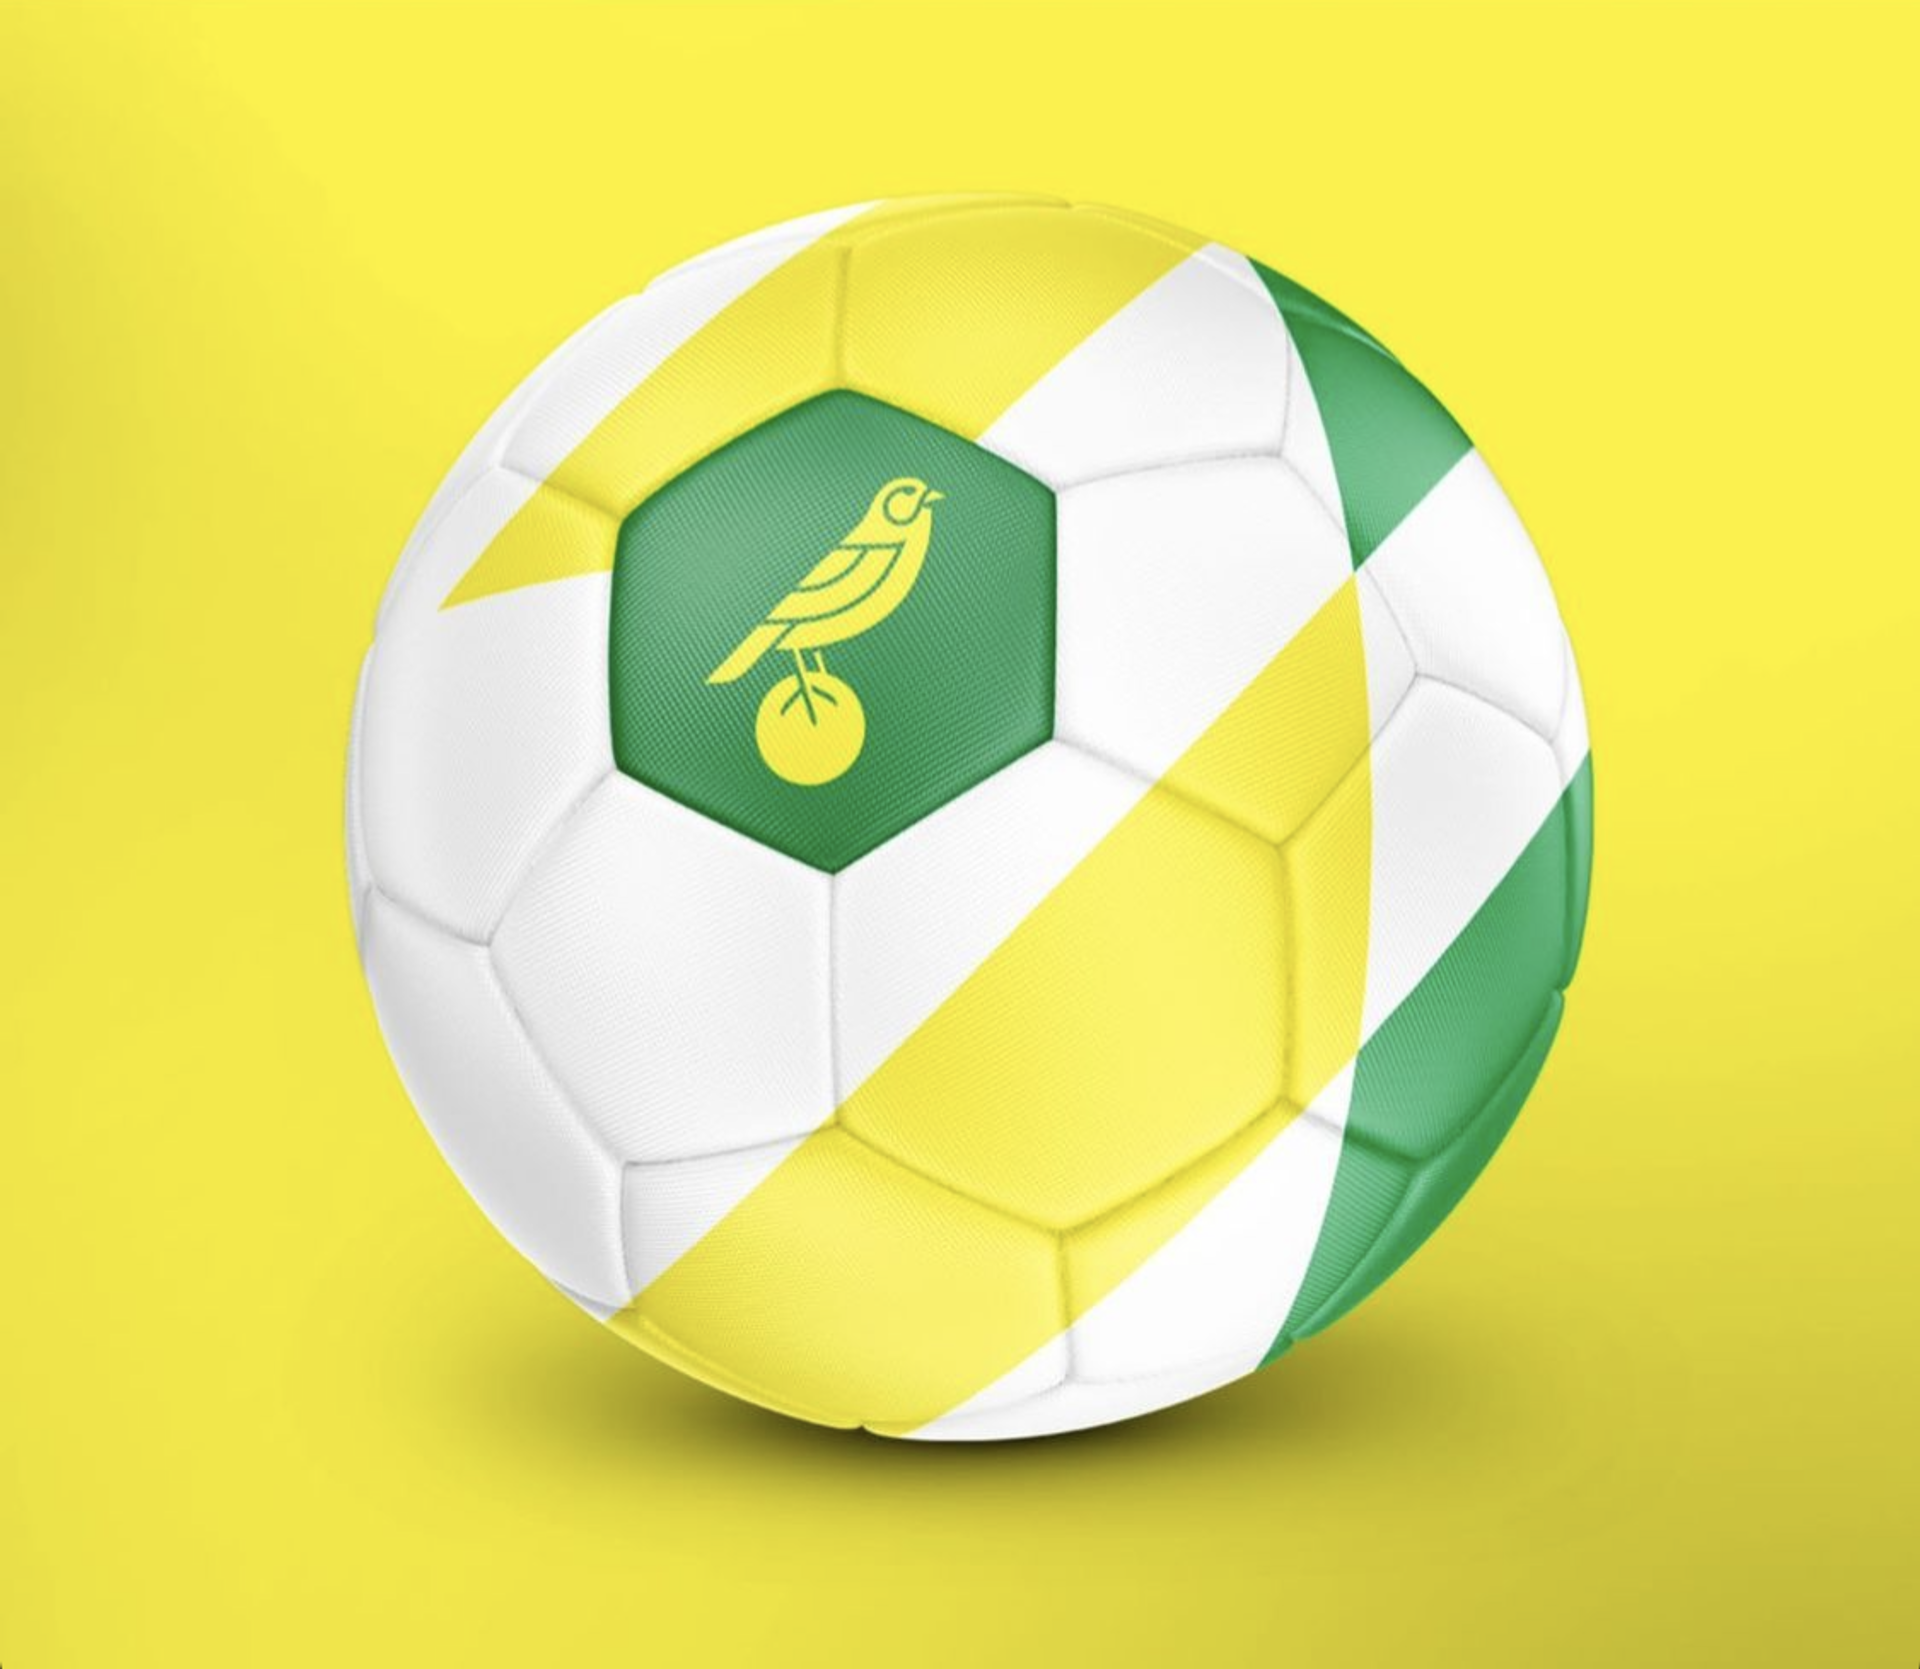 The Canaries' crest gets a first update in 50 years